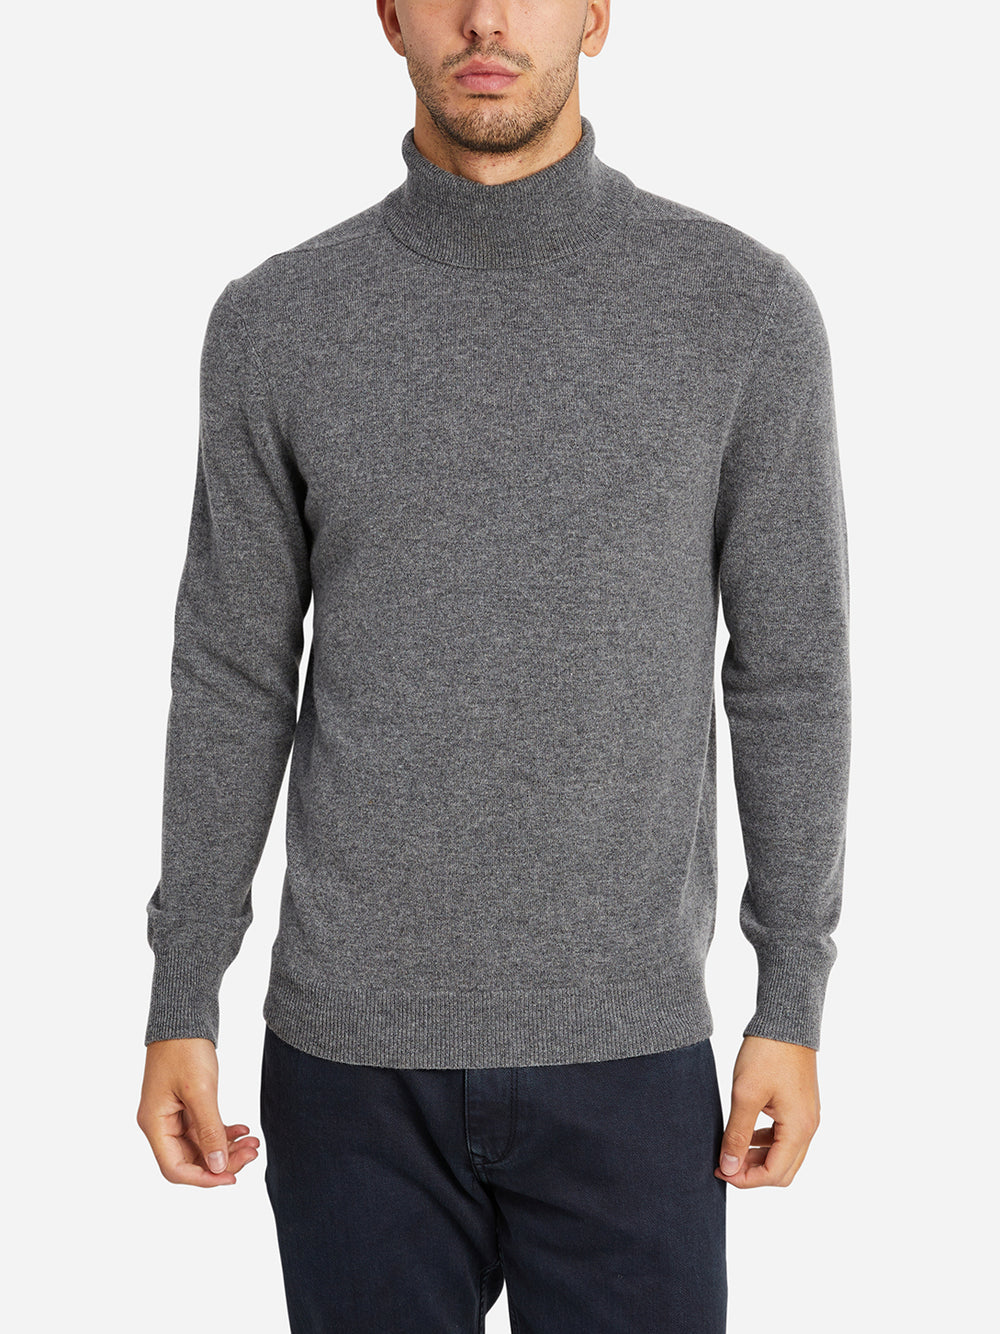  QUEGO Sweaters for Men- Men Turtleneck Cable Knit Sweater  (Color : Black, Size : Large) : Clothing, Shoes & Jewelry